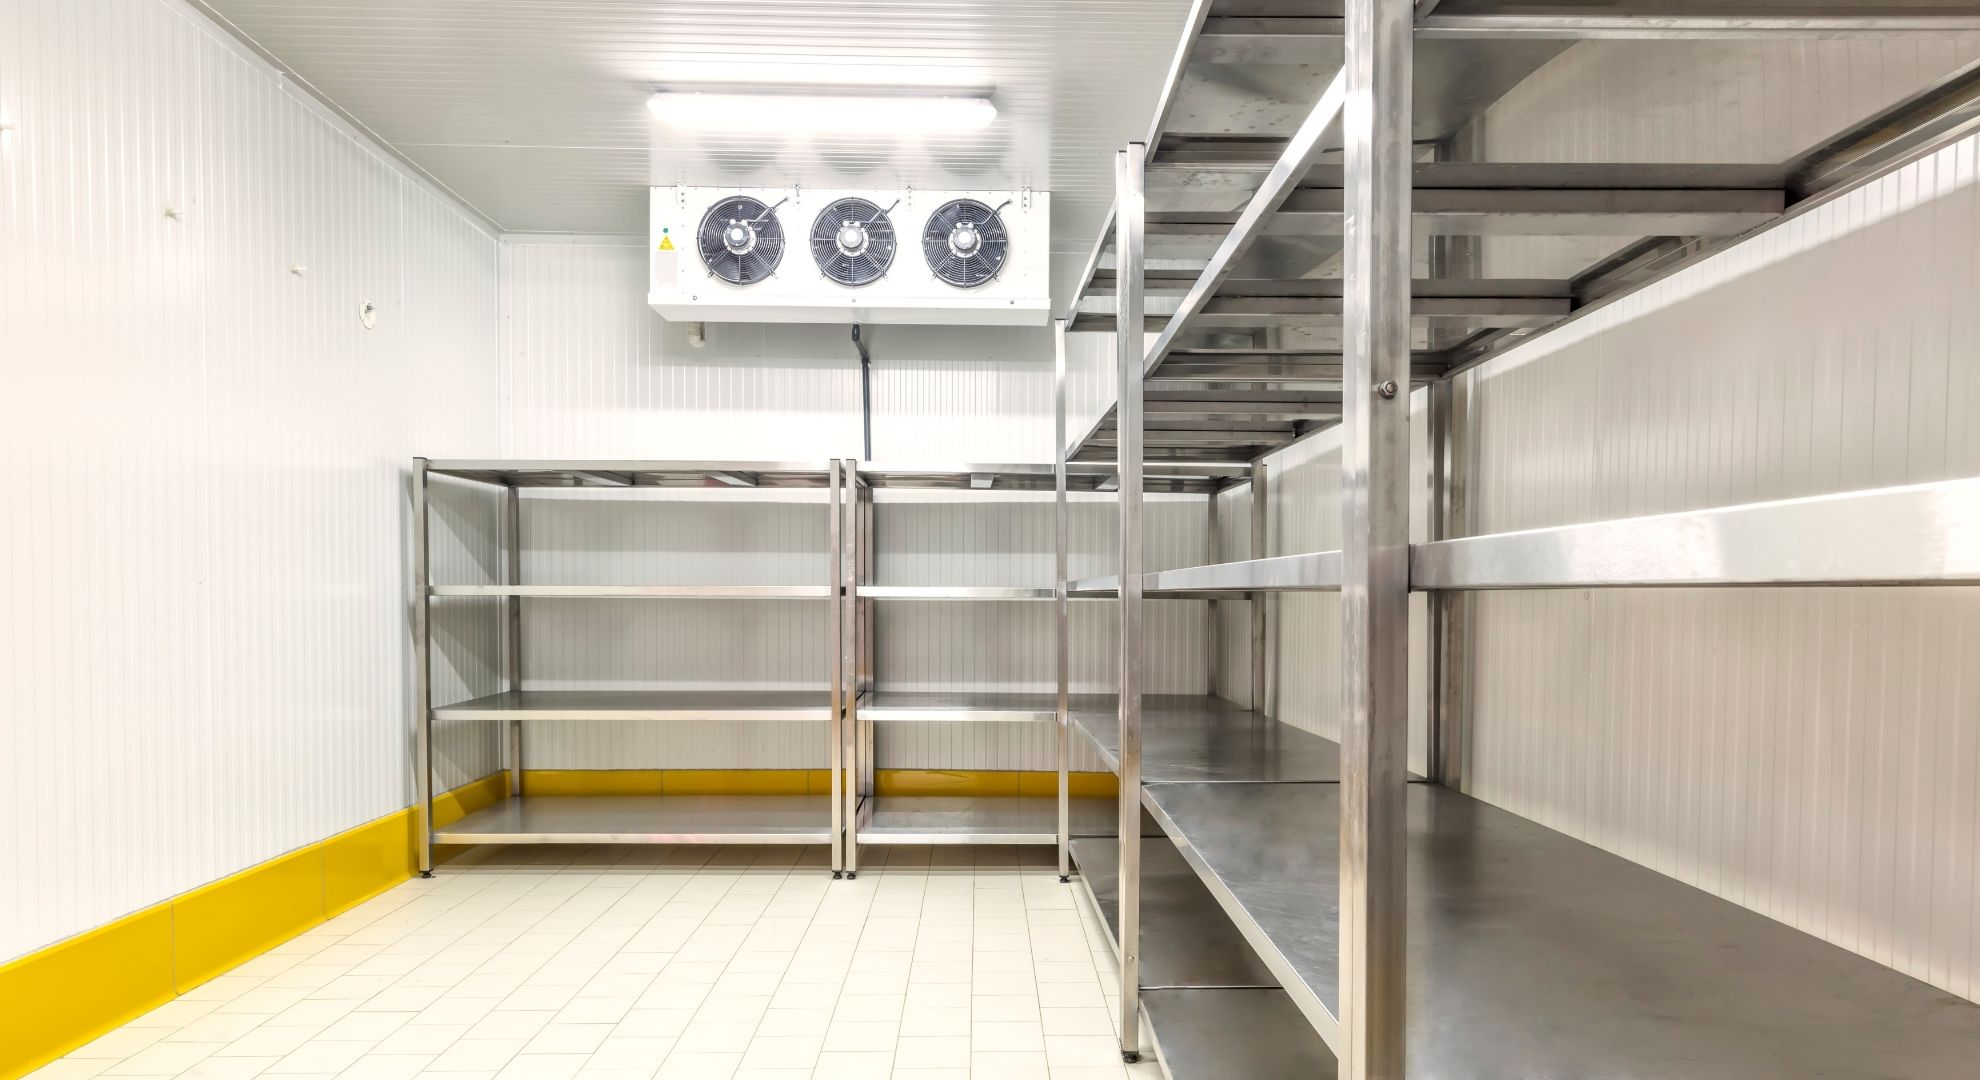 Commercial Coolrooms, Freezer Rooms